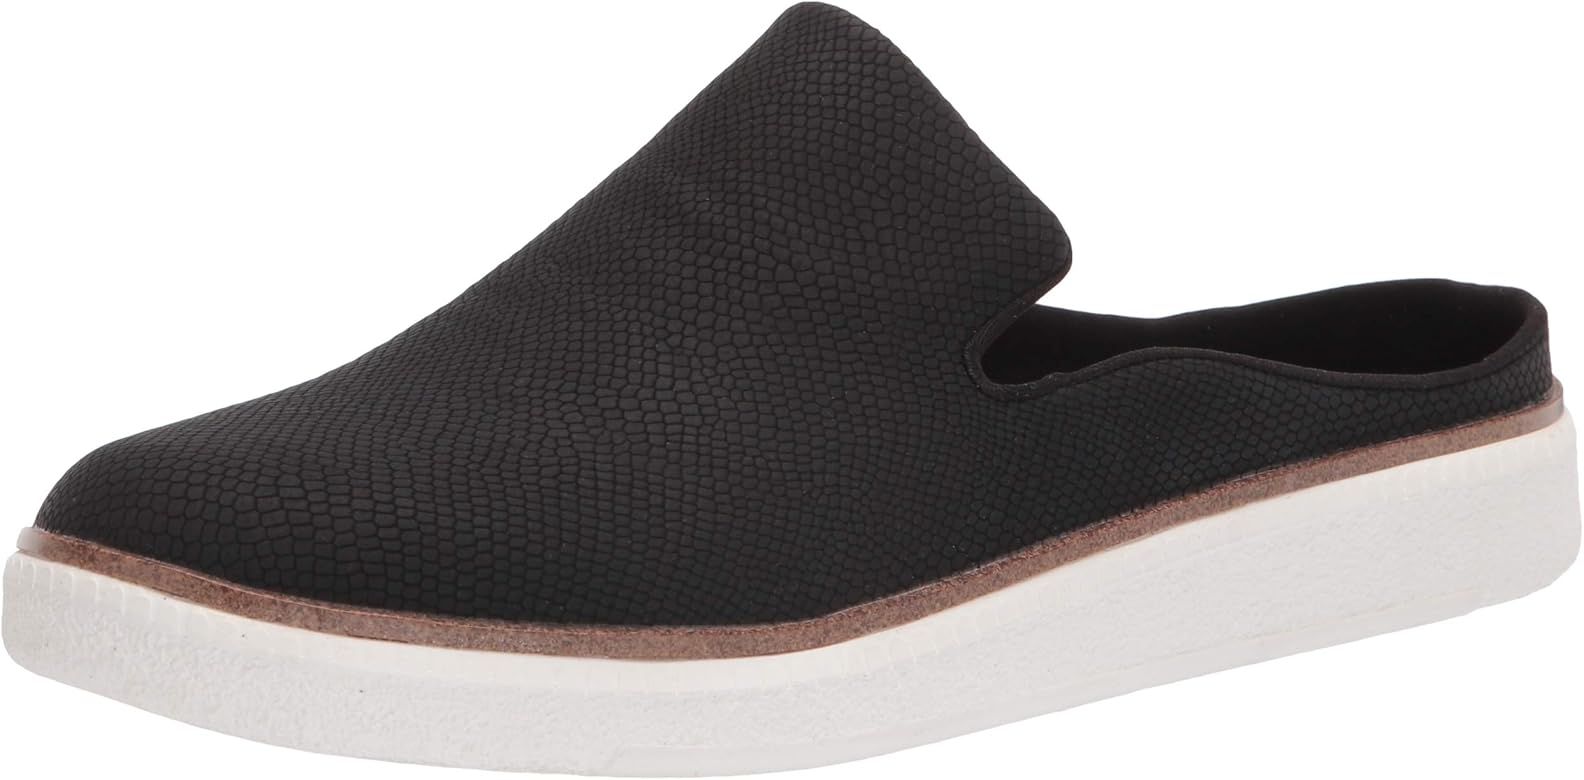 Dr. Scholl's Shoes Women's Sink in Clog | Amazon (US)